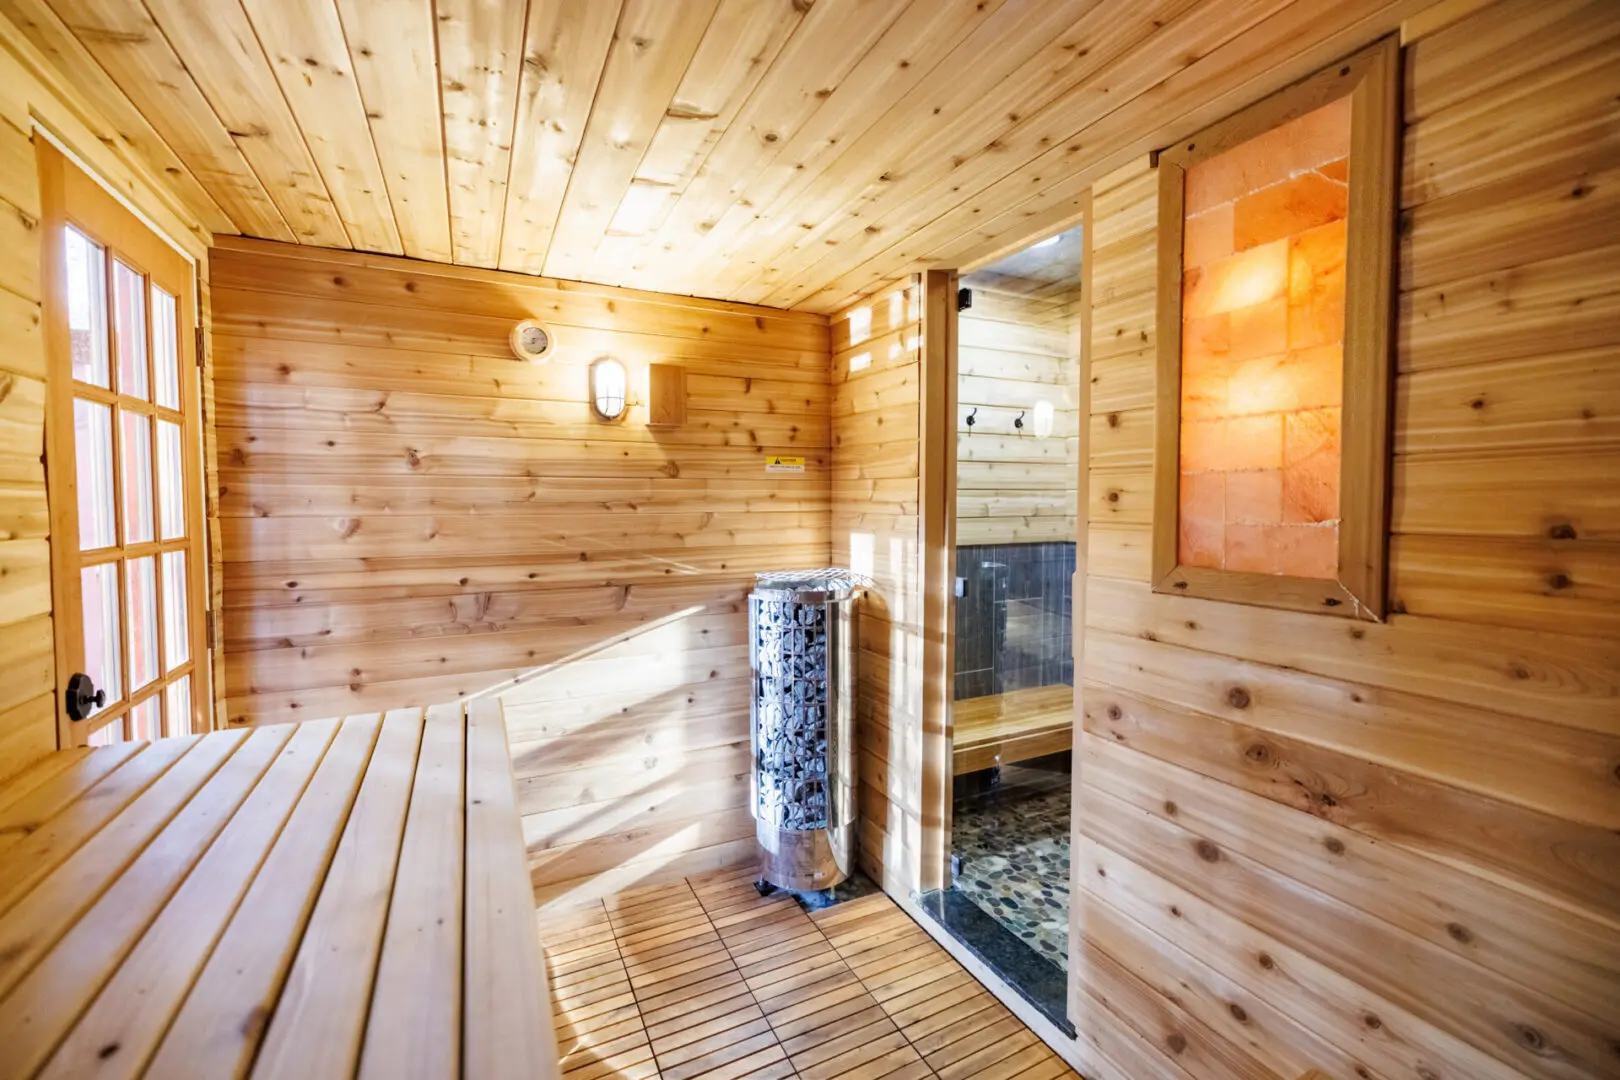 A cozy wooden sauna room with a bench at the Little River Point.